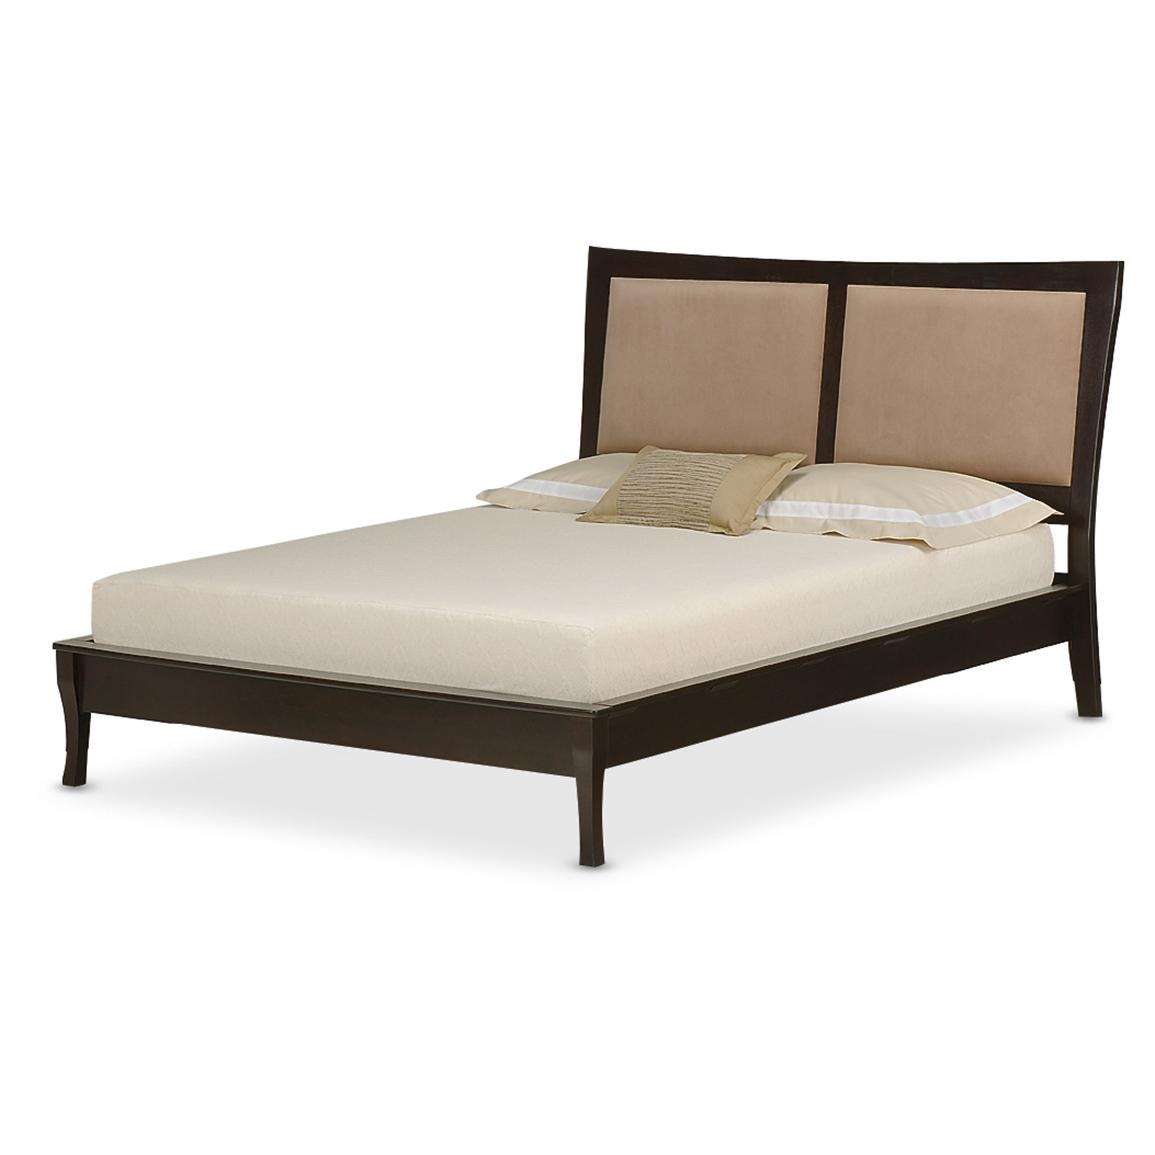 Best Mattresses of 2020 Updated 2020 Reviews‎ 6 Inch